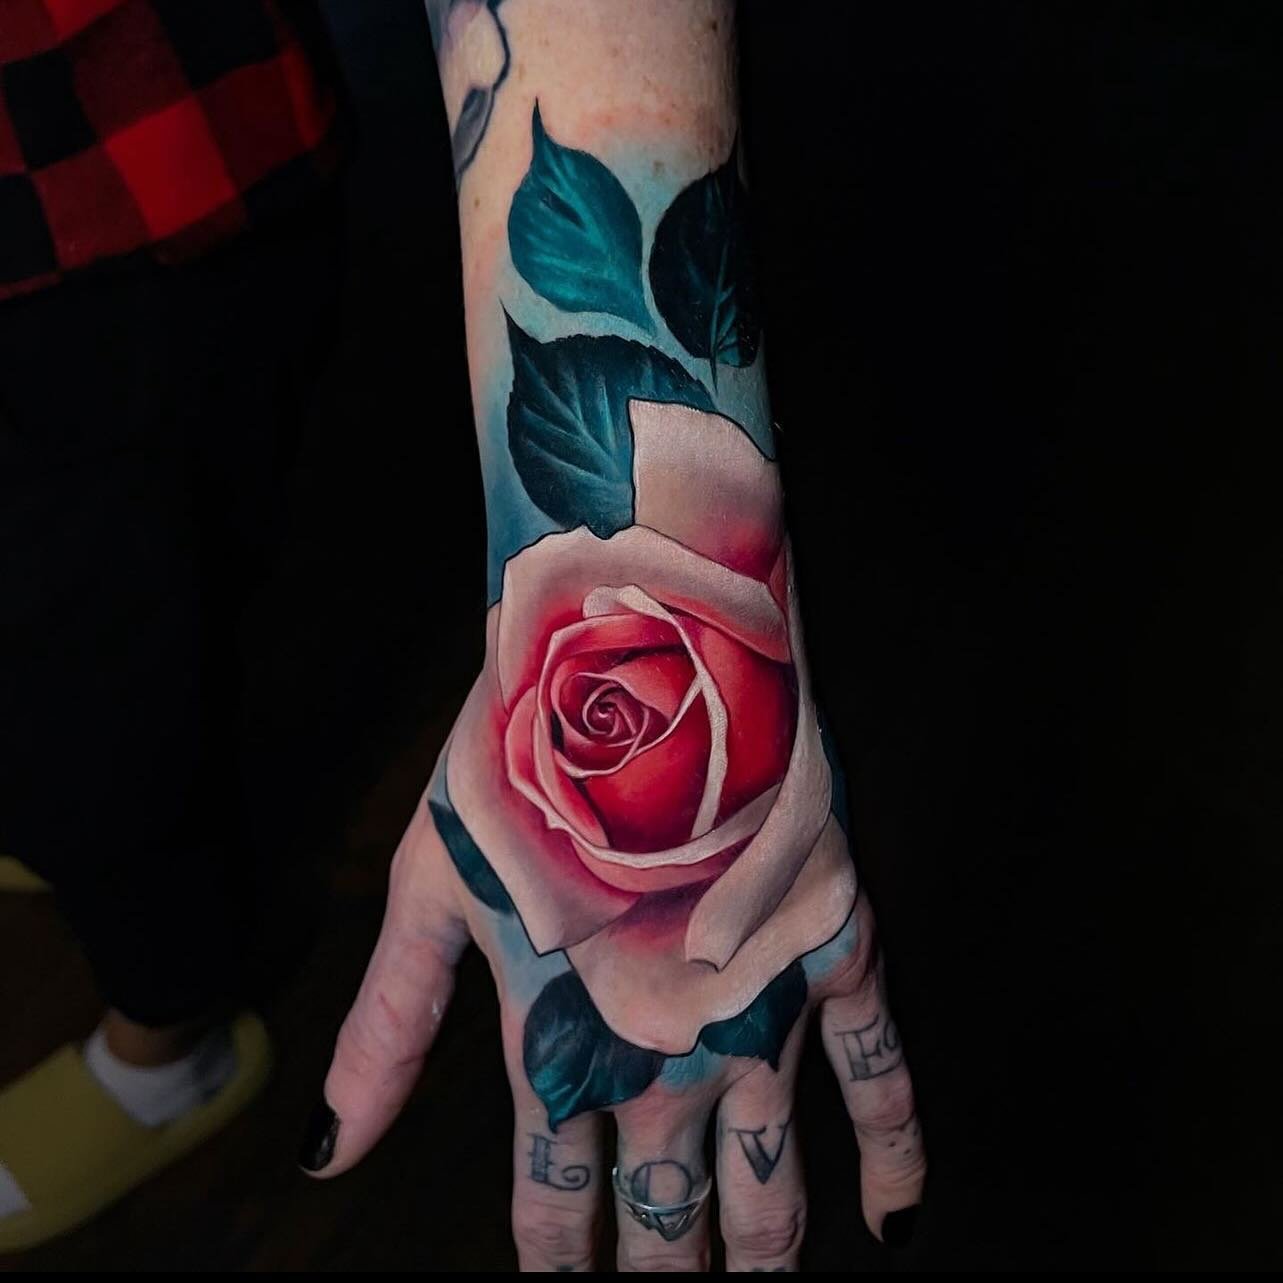 This rose was done by resident artist @jessepinette of @niteowltattoomass 🌹🌹🌹
➕➕➕➕➕➕➕➕➕➕➕

NiteOwl Tattoo Mass 🦉🦉🦉
6 Service Center Rd
Northampton MA 01060
WALK-INS Always welcome!!!! NO PIERCINGS!!! 
📞413-727-3760
➡️www.niteowlnoho.com⬅️
Like